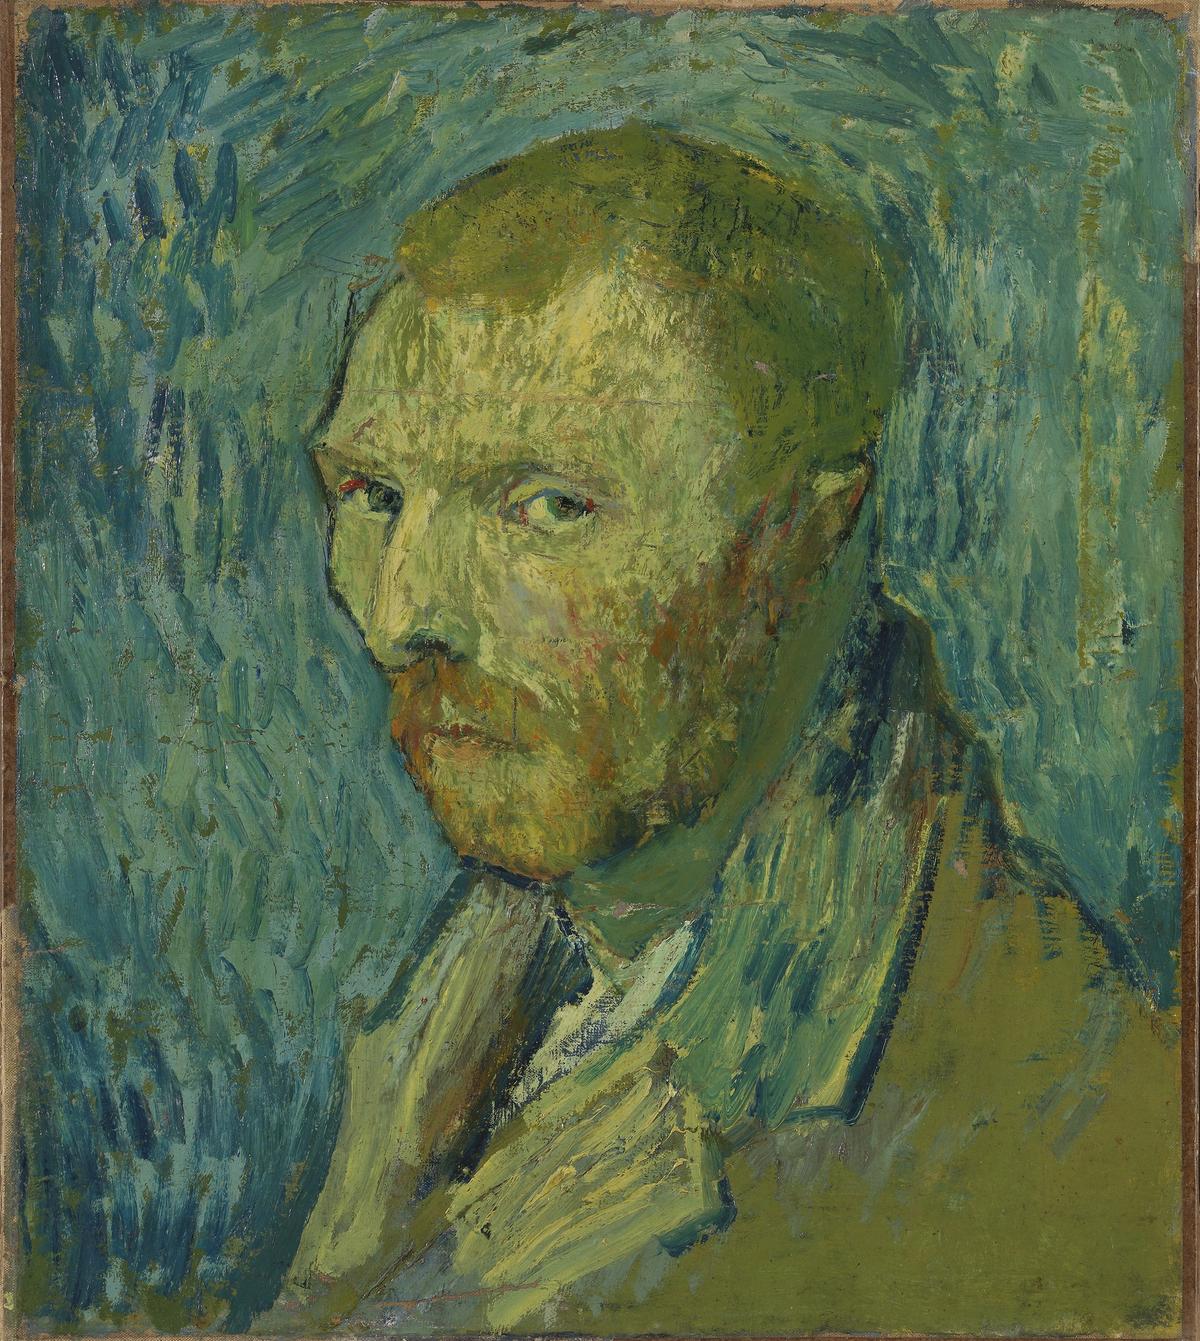 Not a fake: Van Gogh self-portrait is his only work painted while suffering  psychosis, experts say